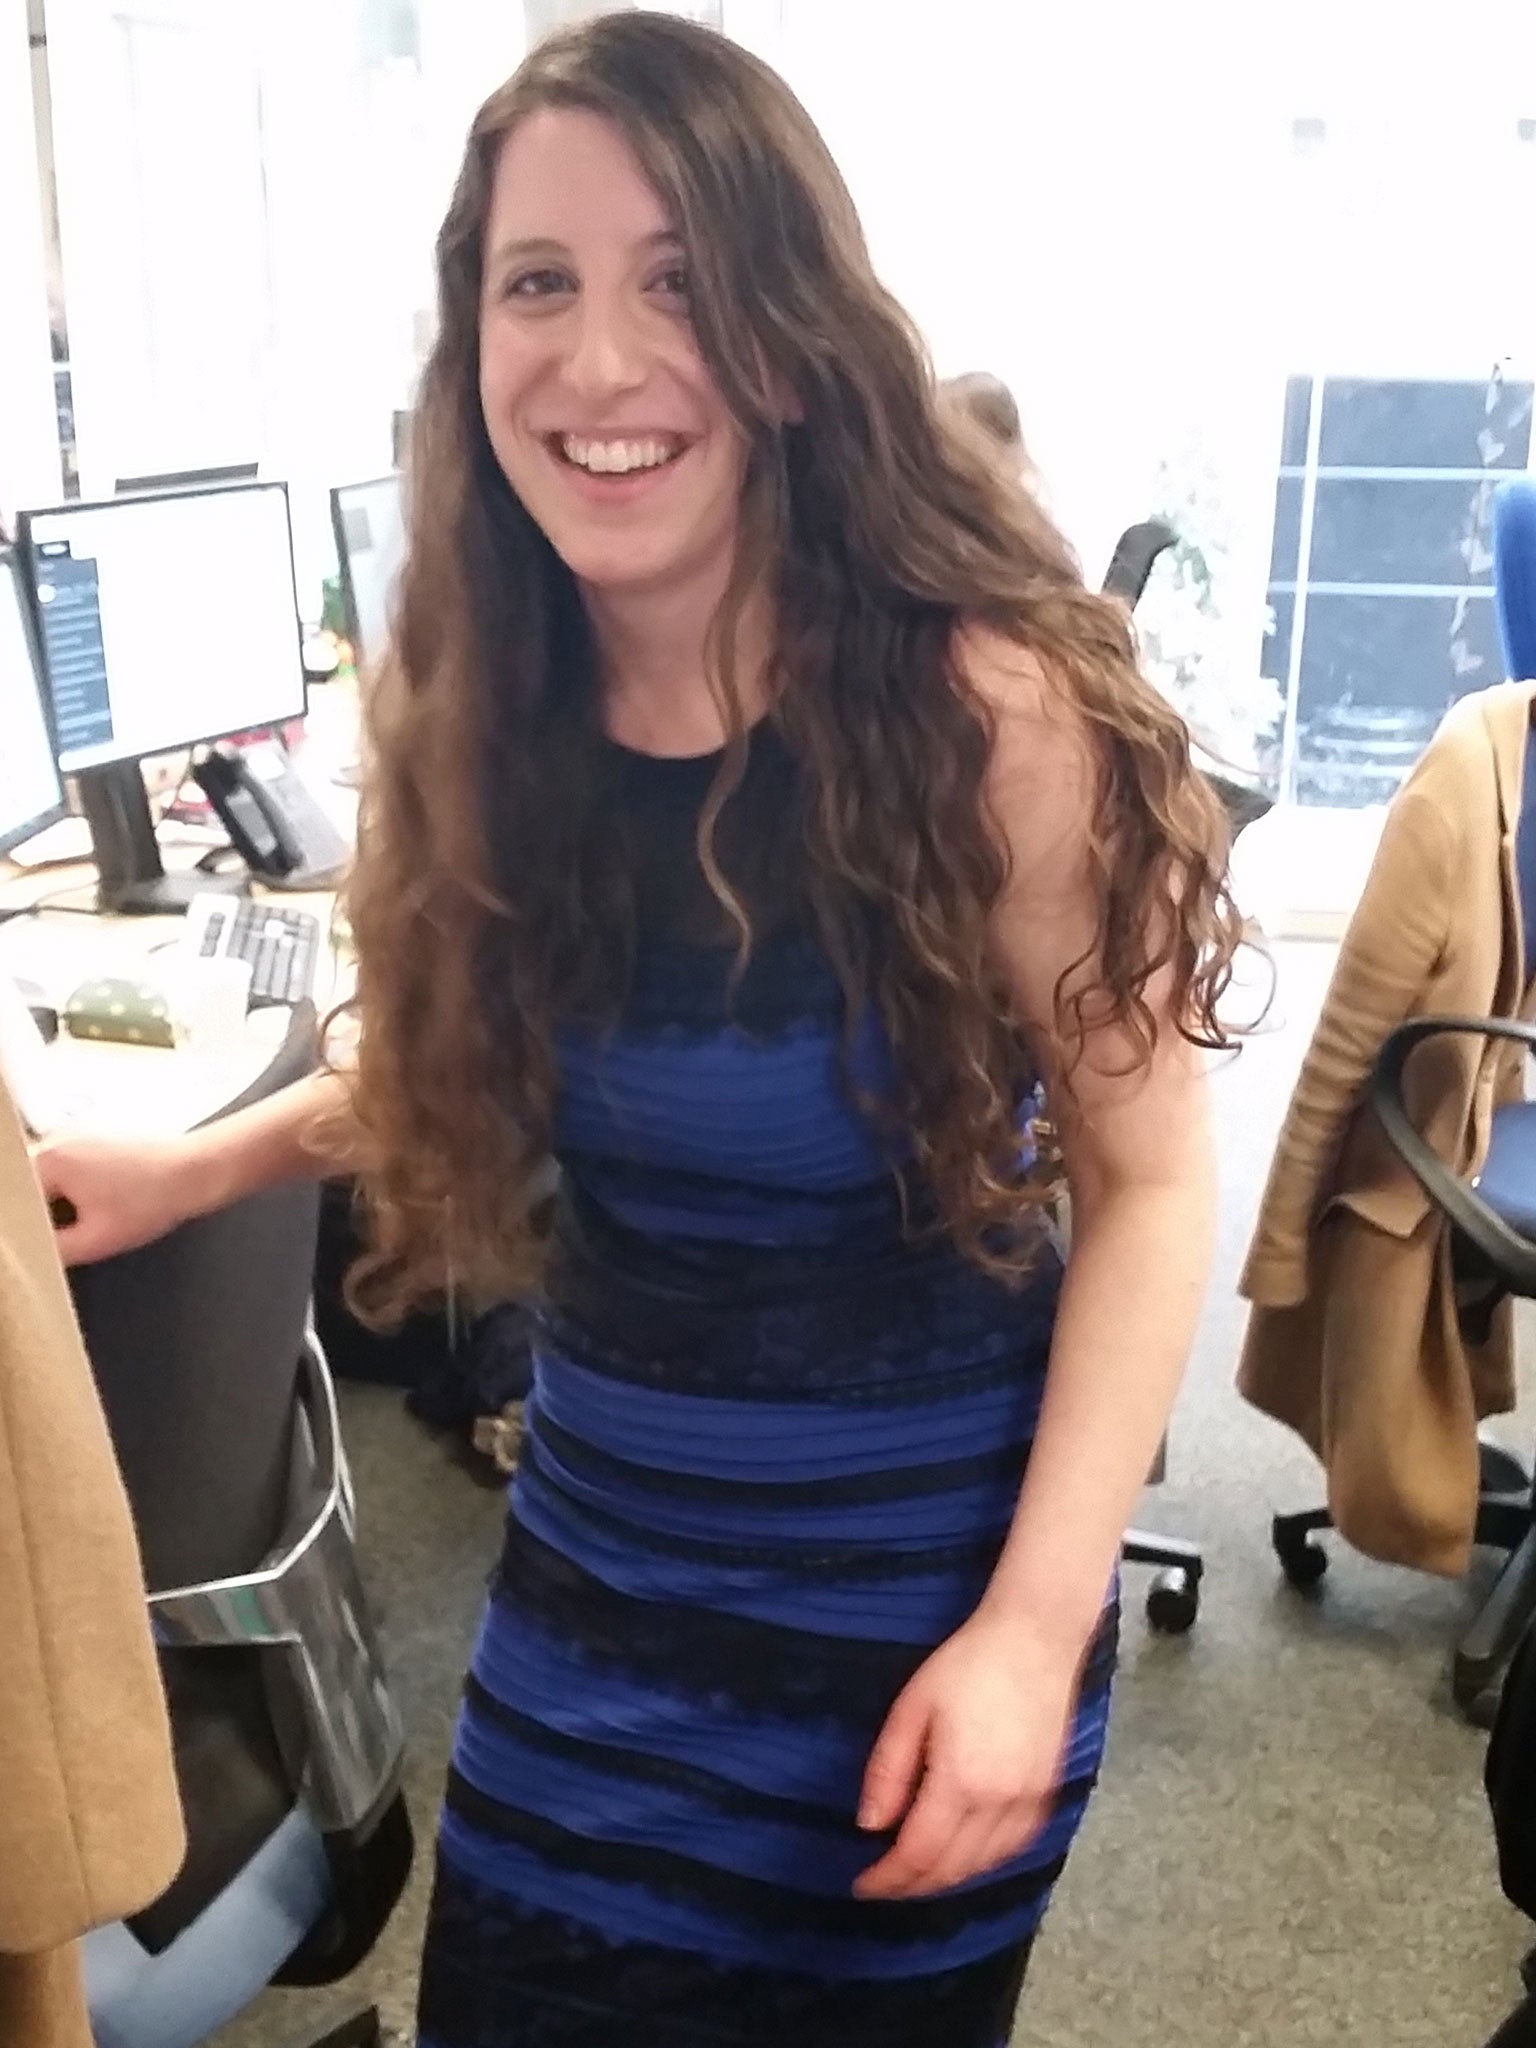 Dina Rickman tries the famous dress on in the office